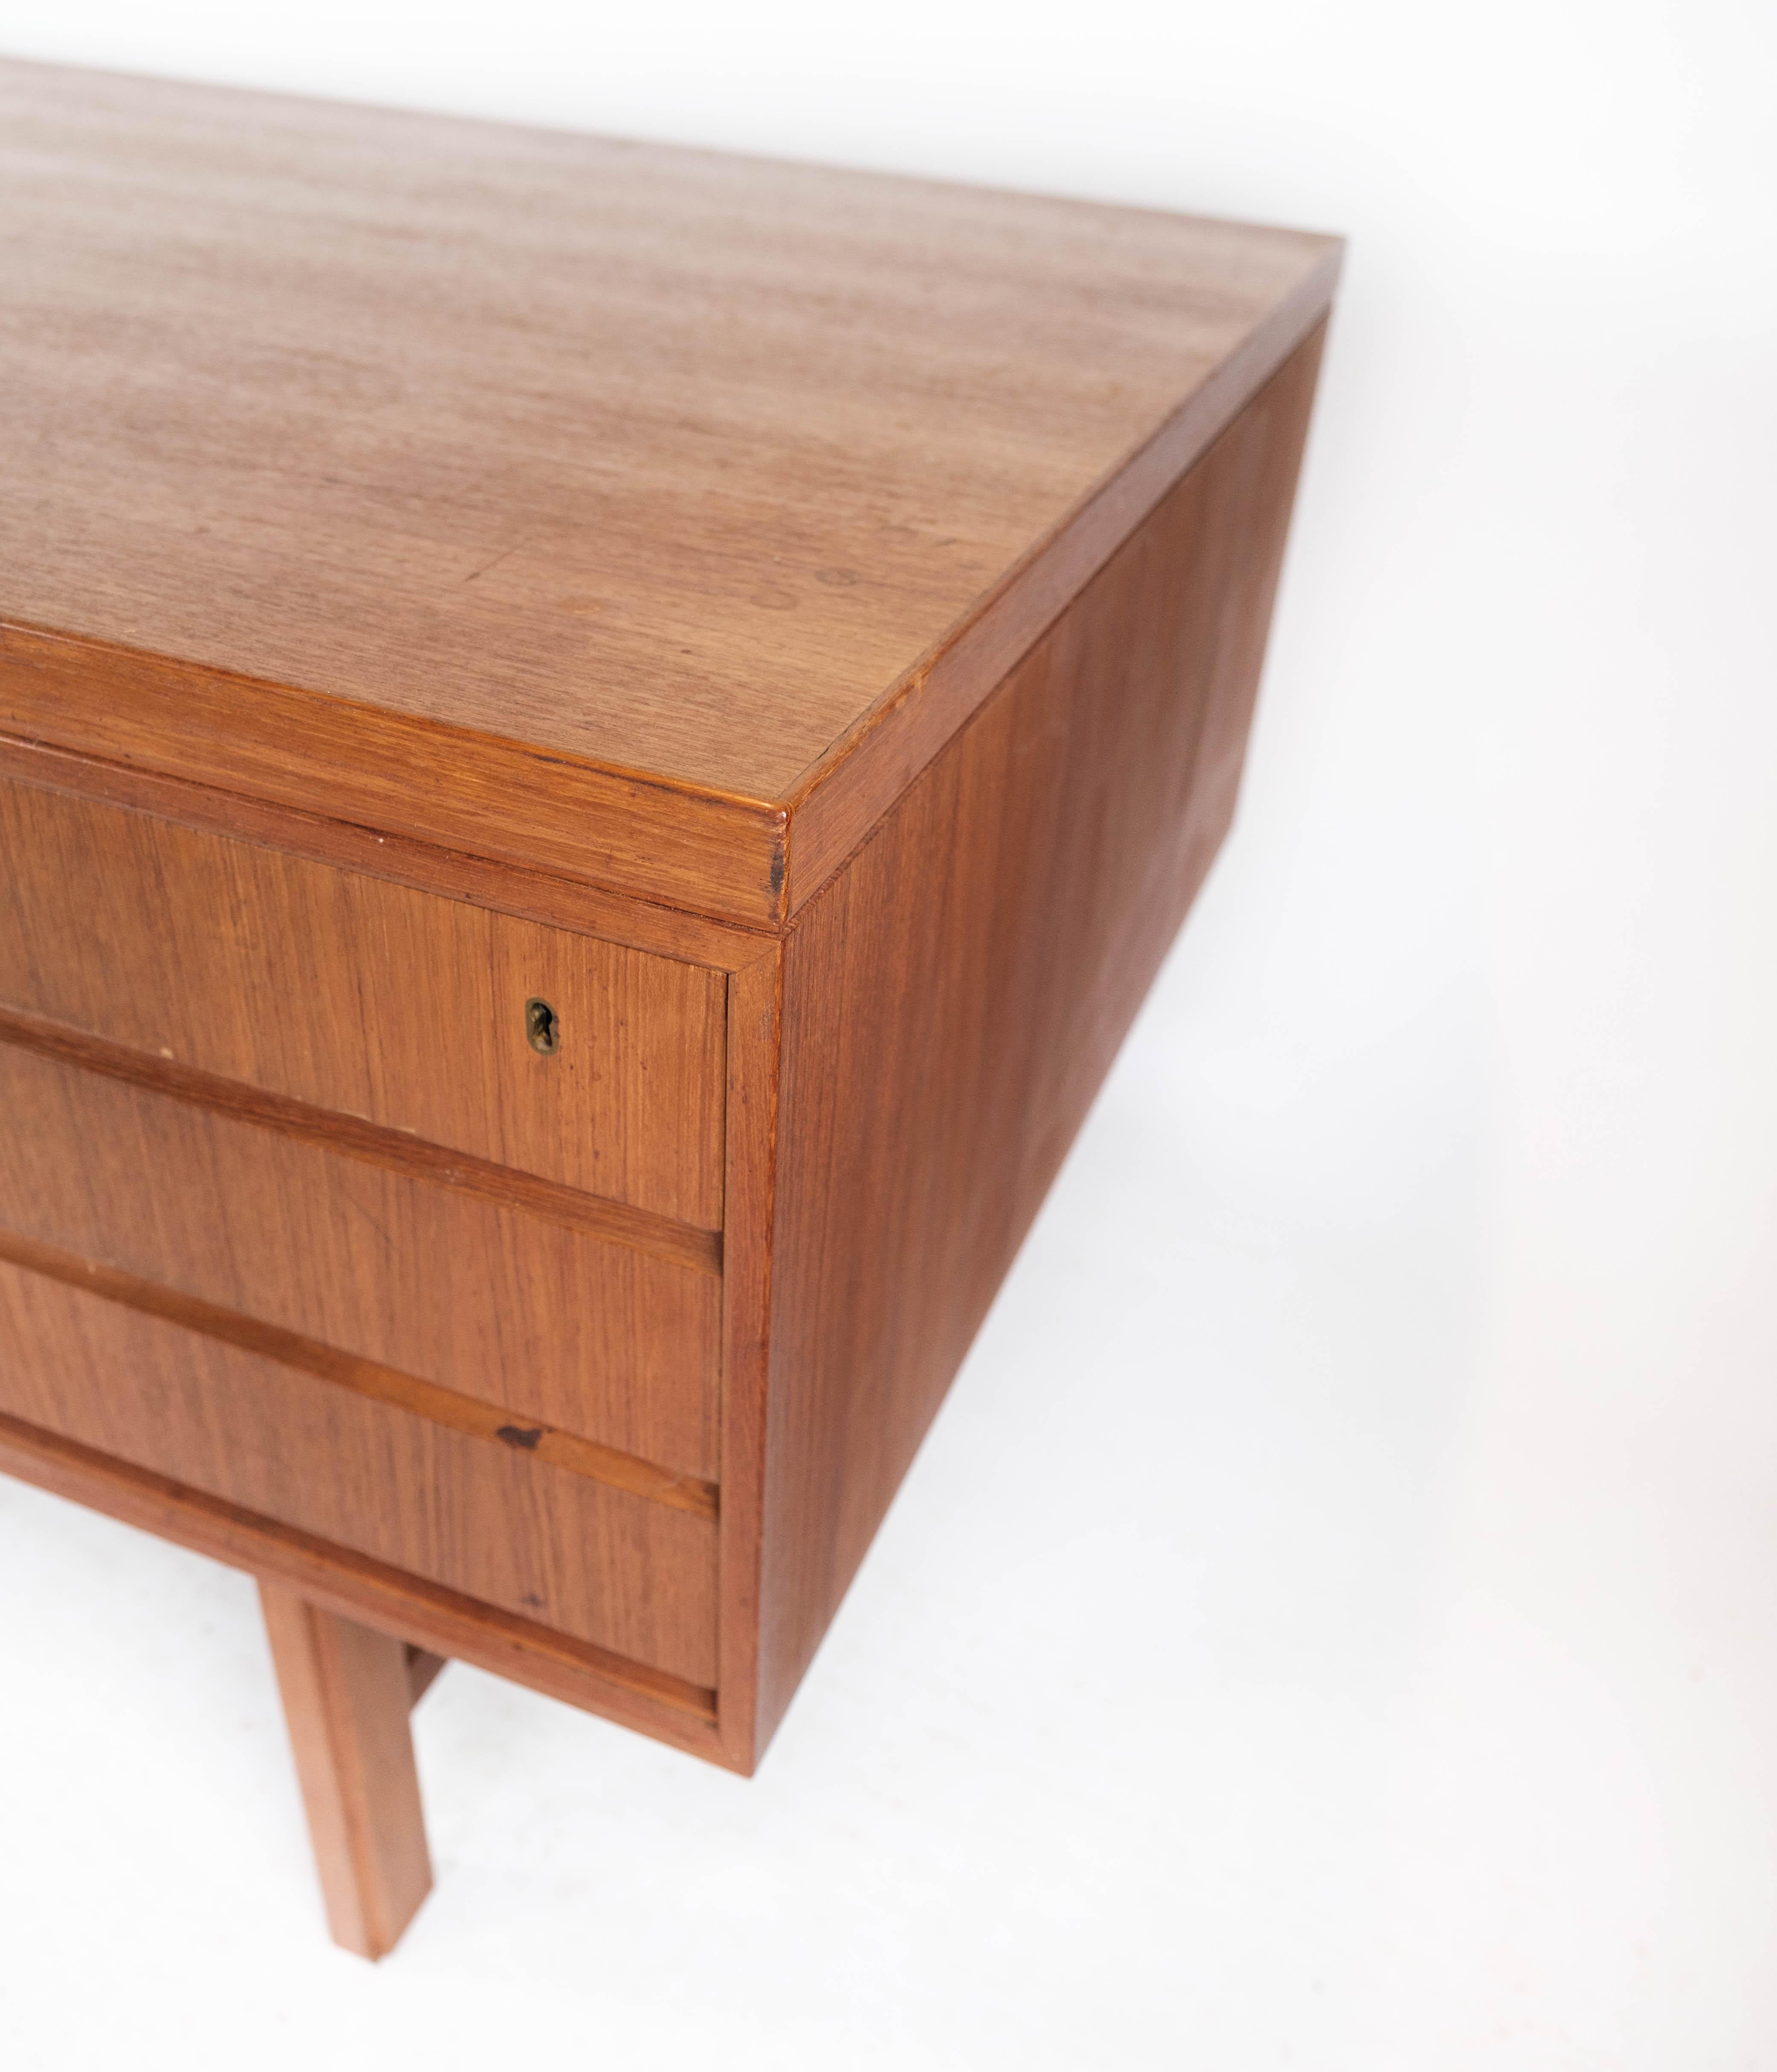 Mid-20th Century Desk Made In Teak Designed By Omann Junior From 1960s For Sale